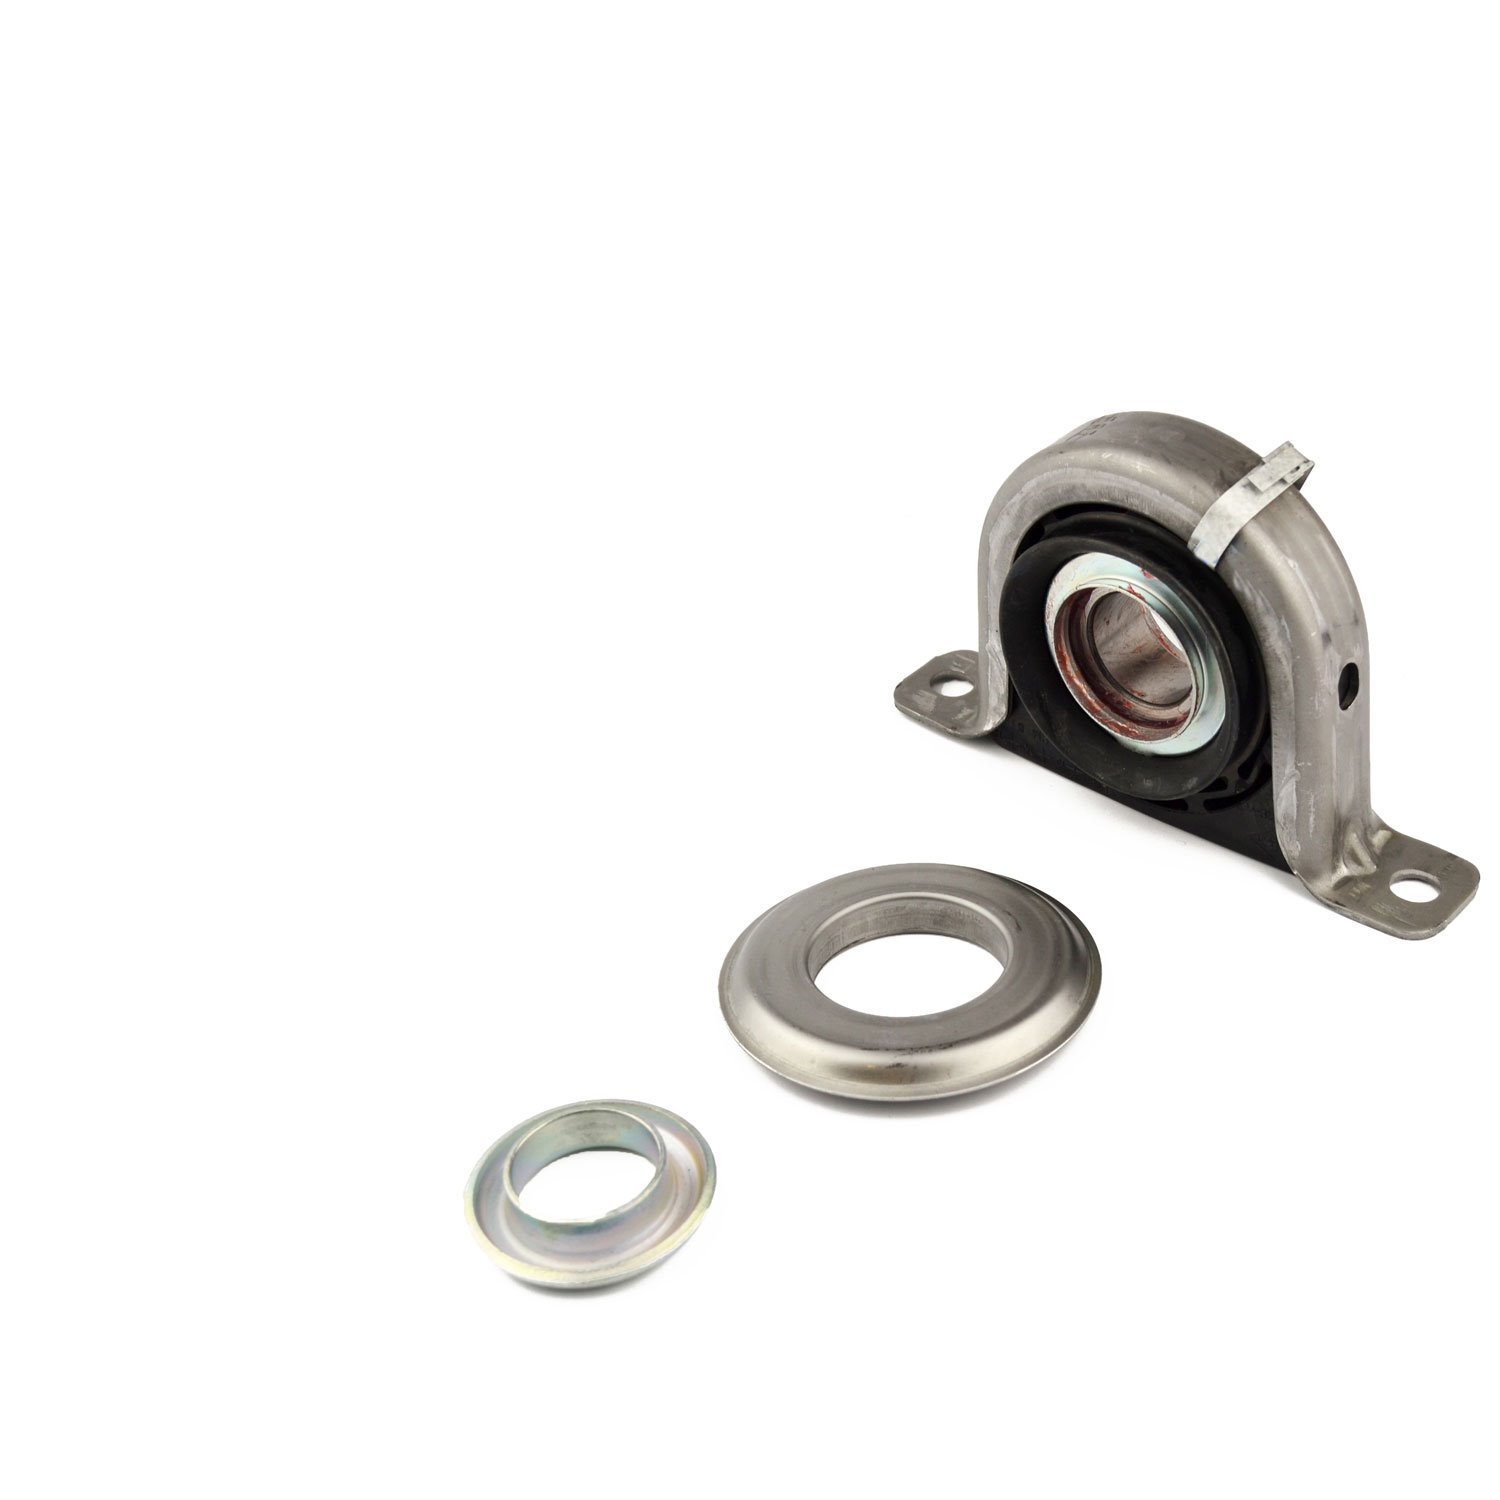 Center Support Bearing ID (A) = 1.378"